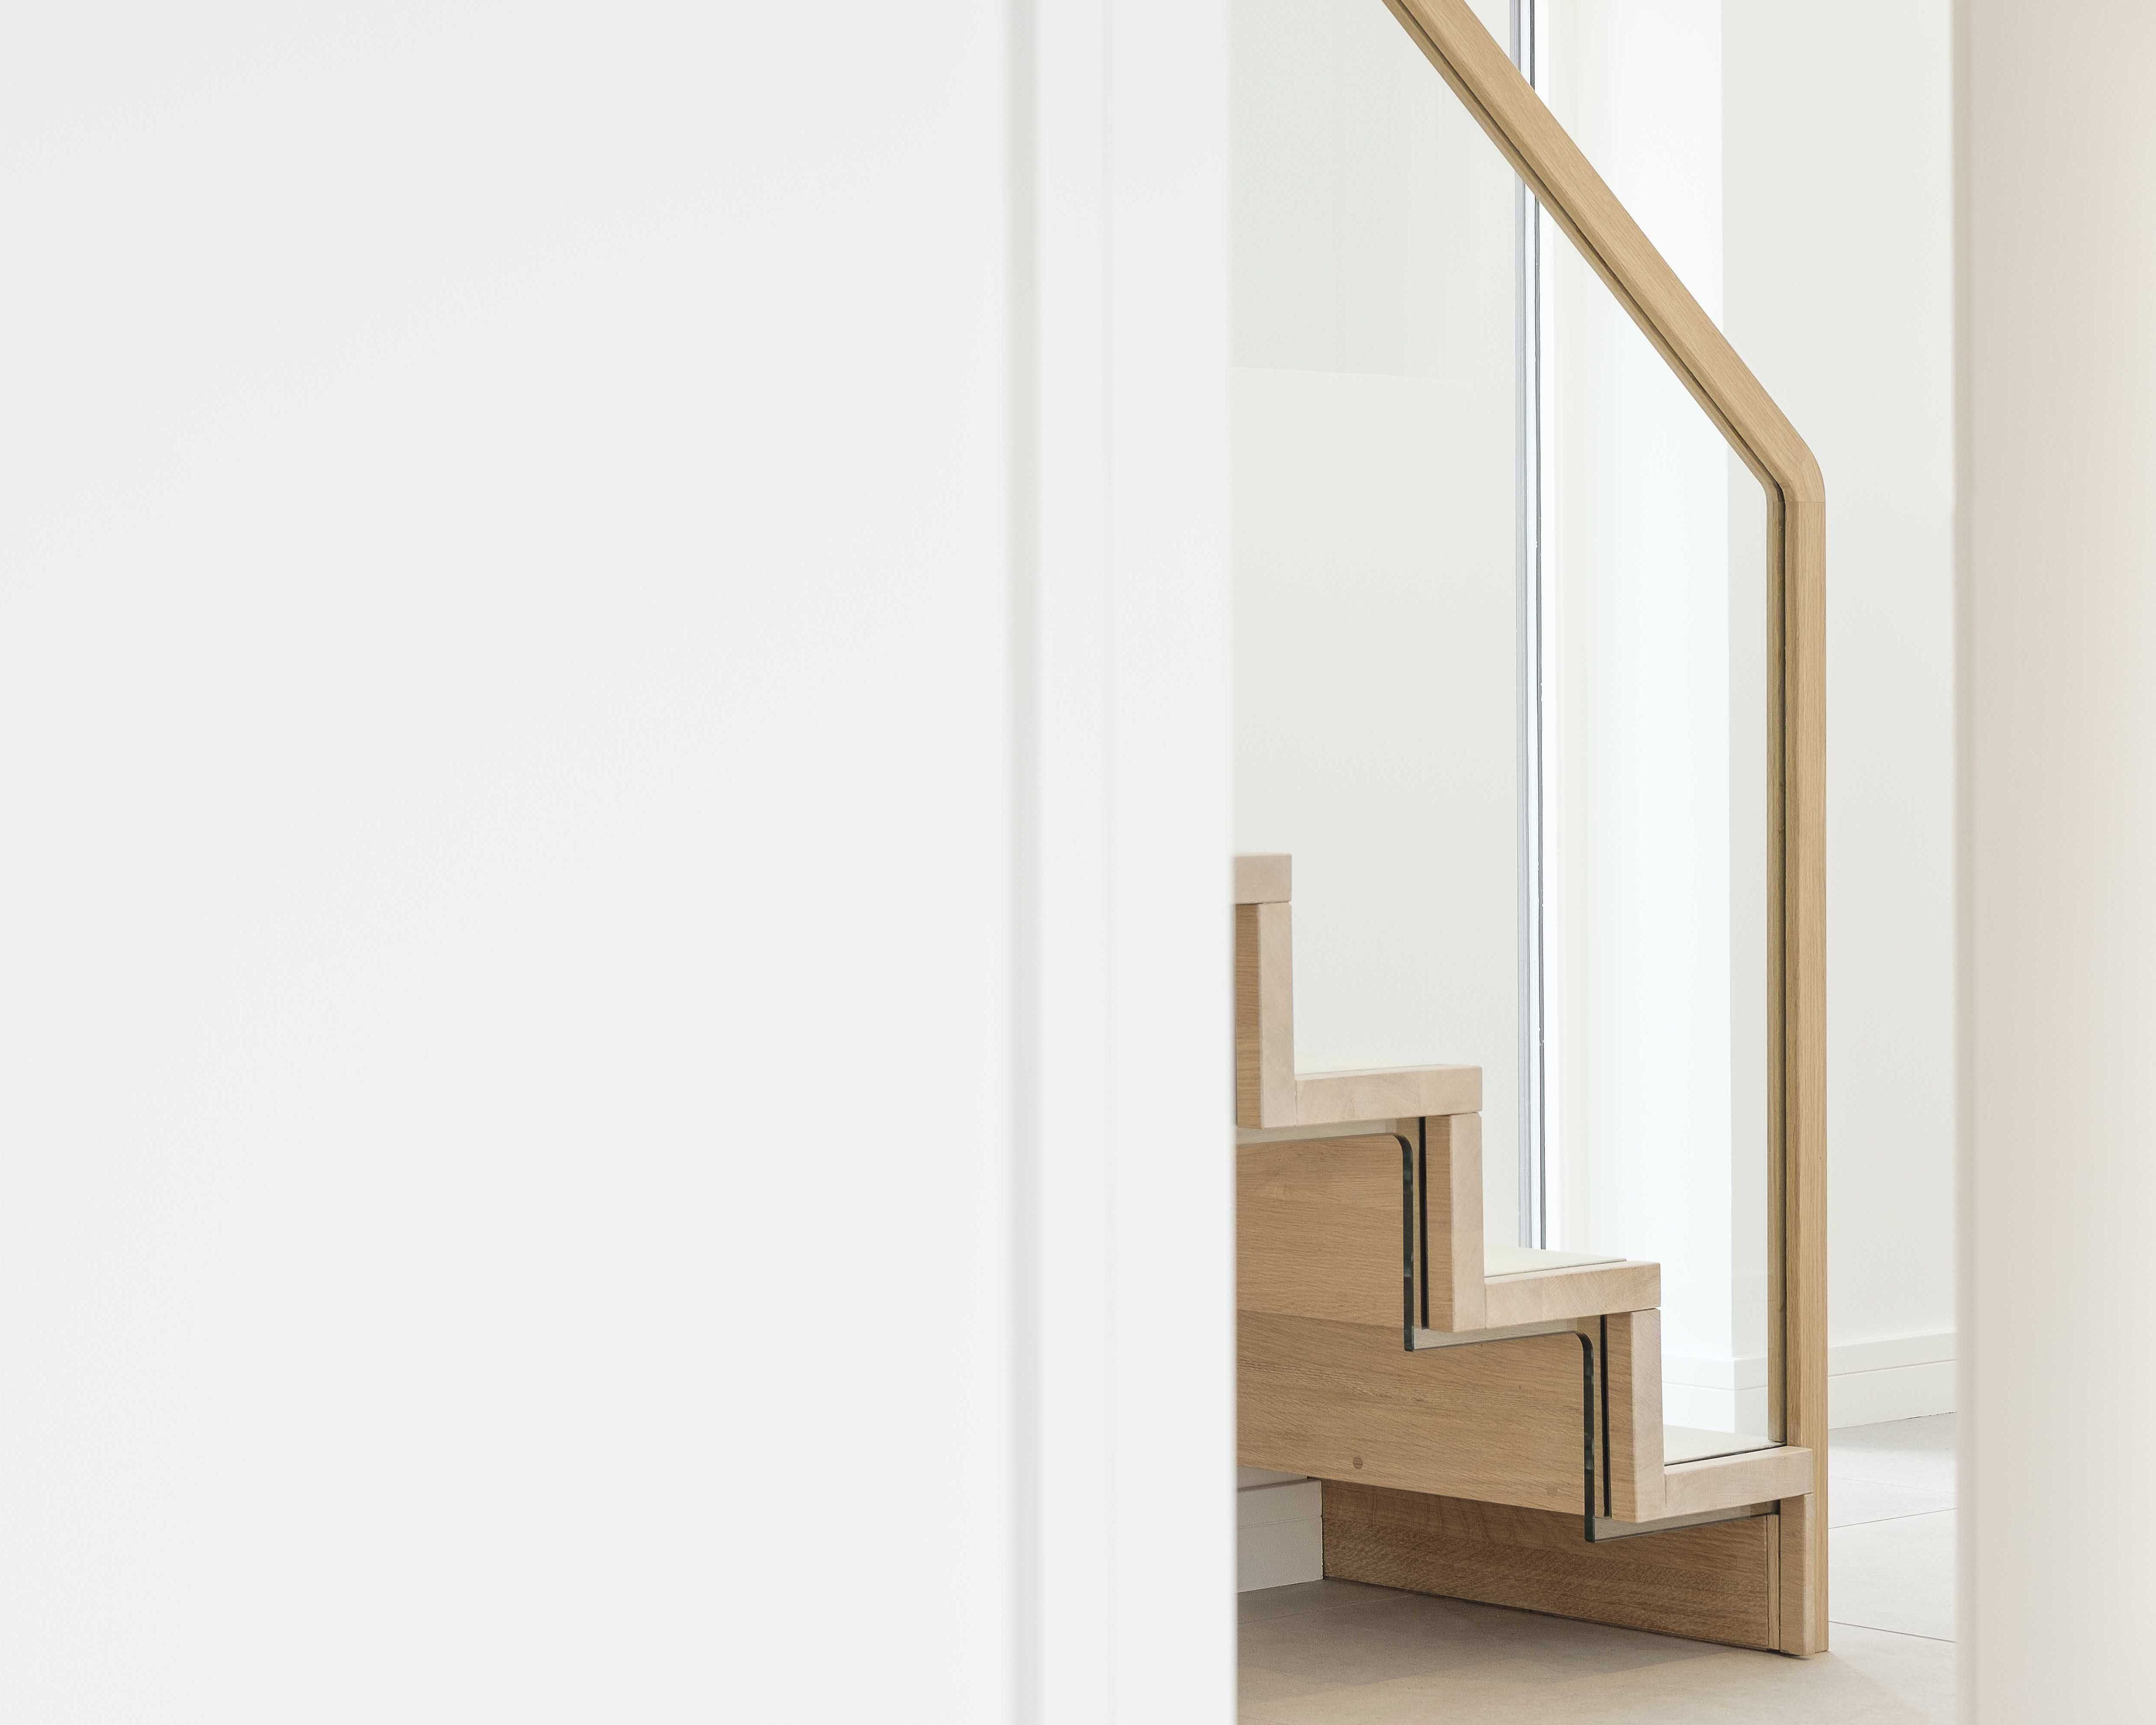 Side view of slim profile cantilevered oak staircase handrail and glass balustrade.